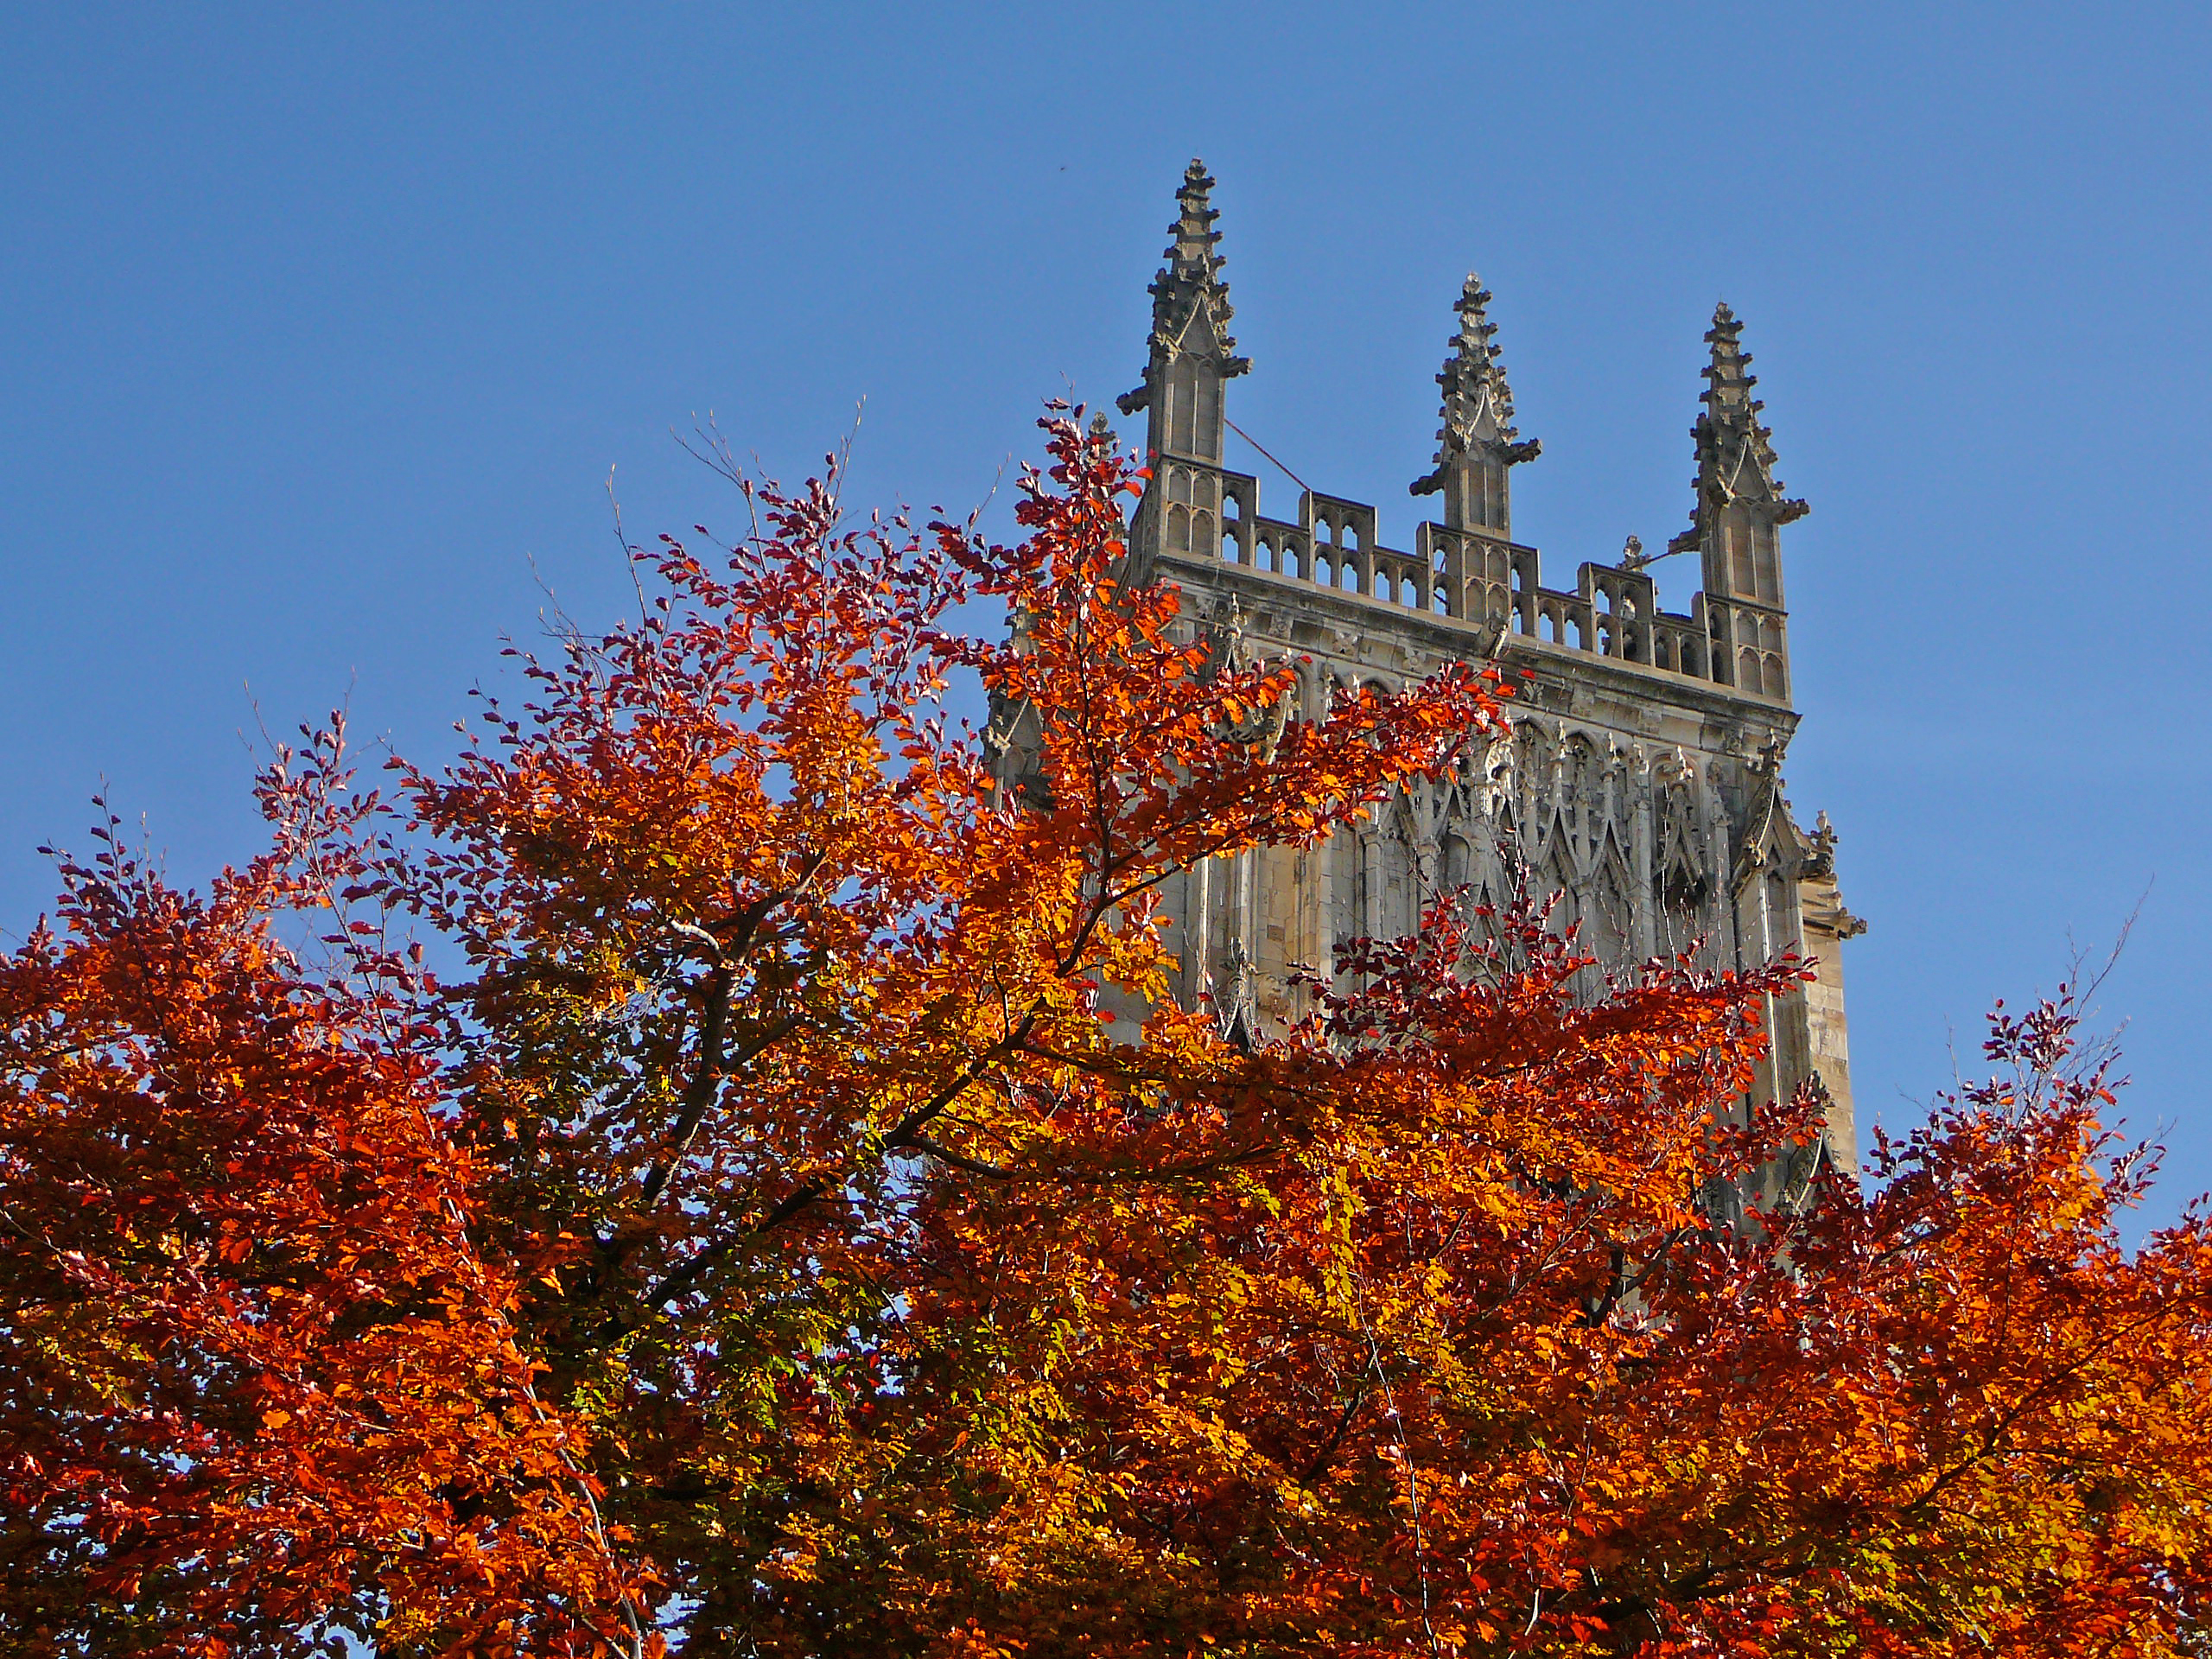 Things to do this October in York!